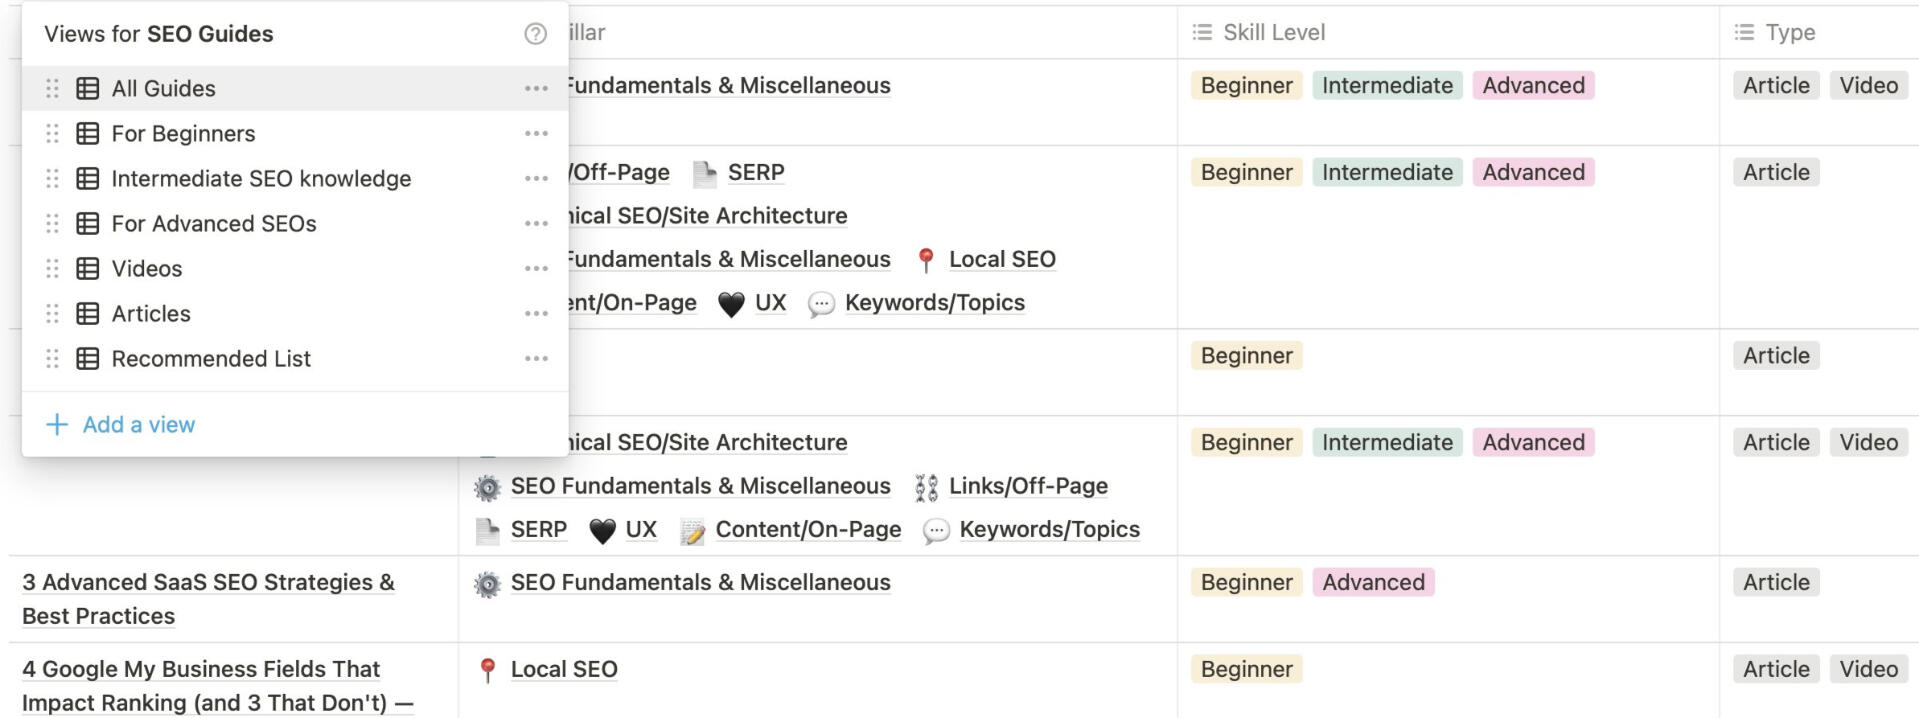 A screenshot of SEO Growth Kit's Notion SEO Guides